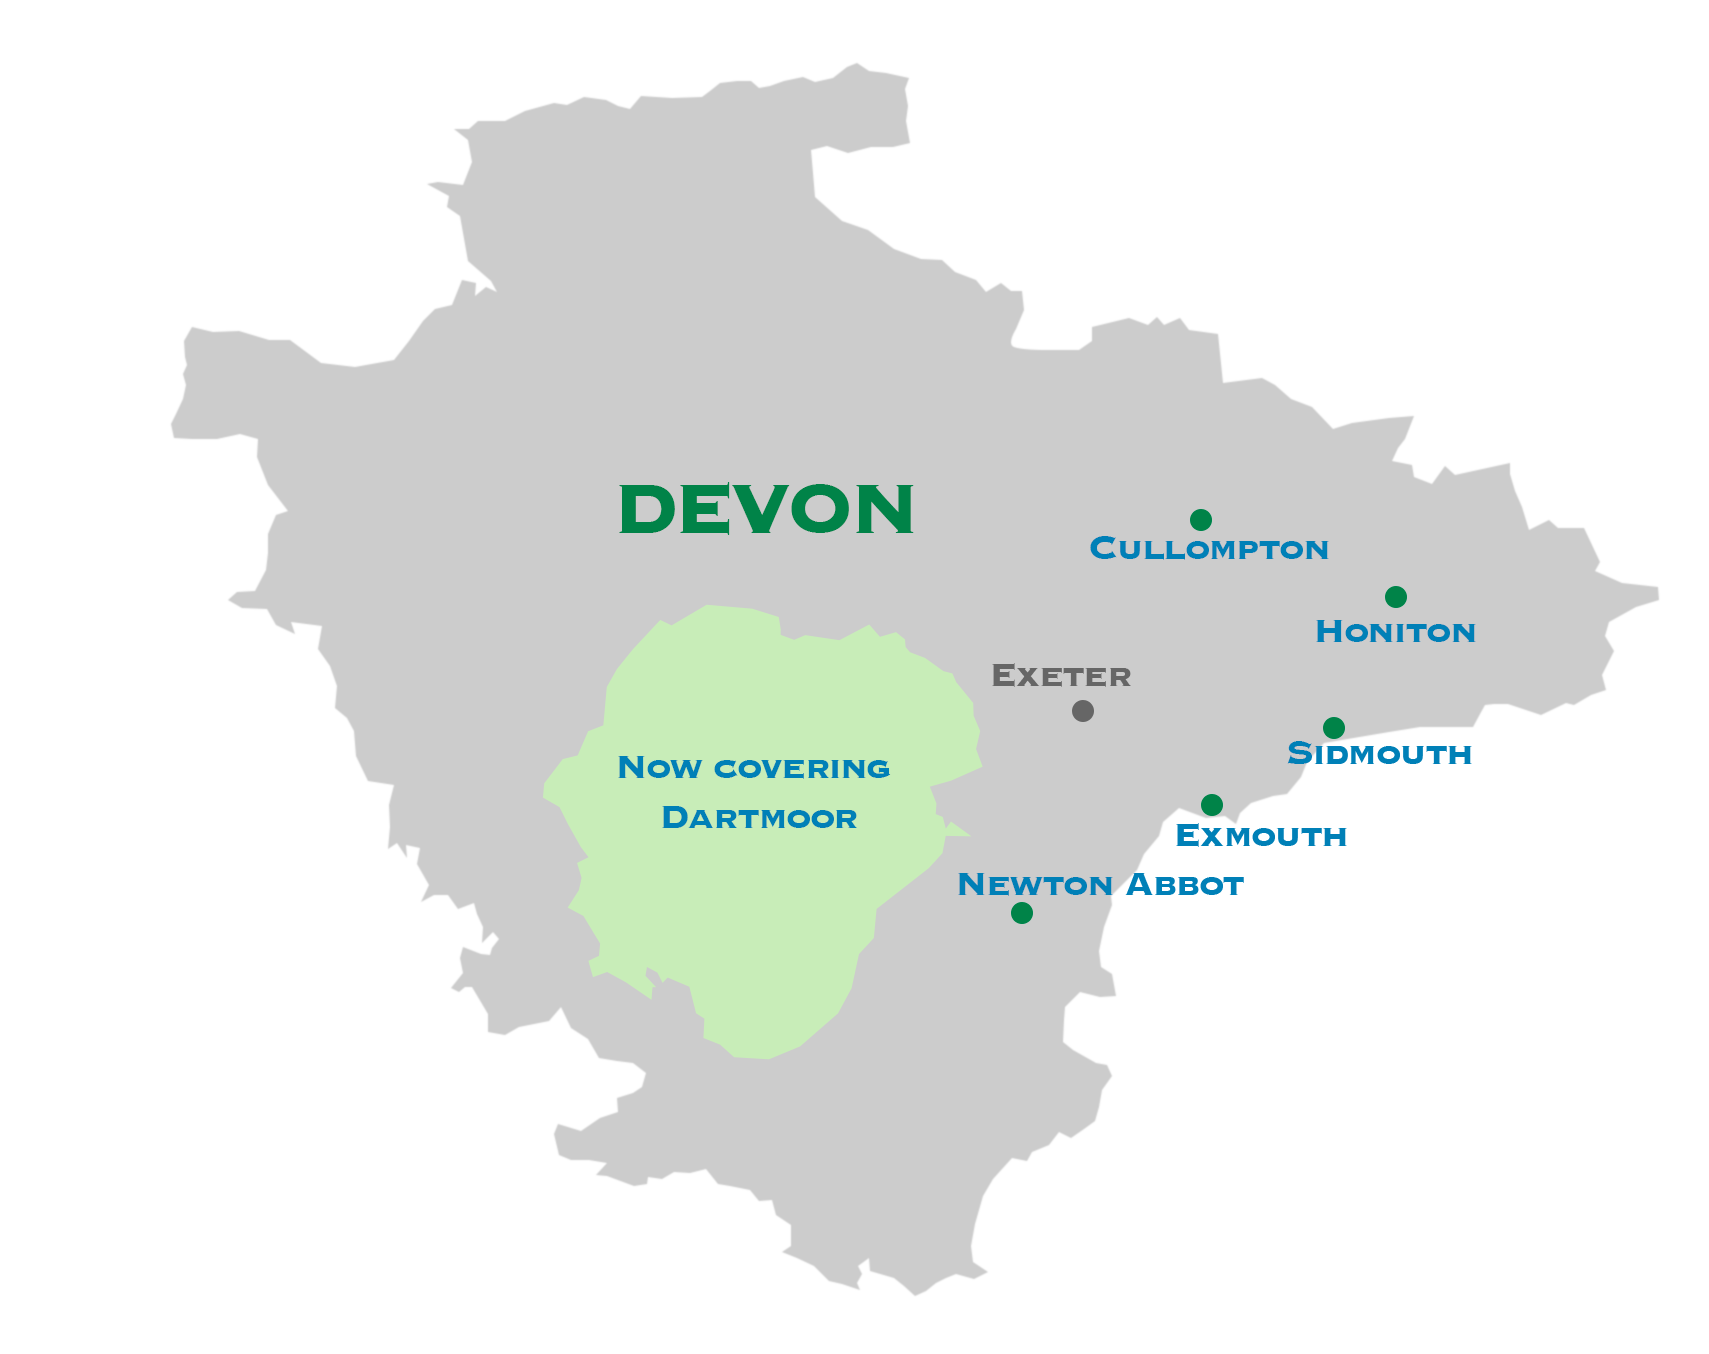 Devon map: Covering Dartmoor & East Devon: Cullompton, Honiton, Sidmouth, Exmouth and Newton Abbot